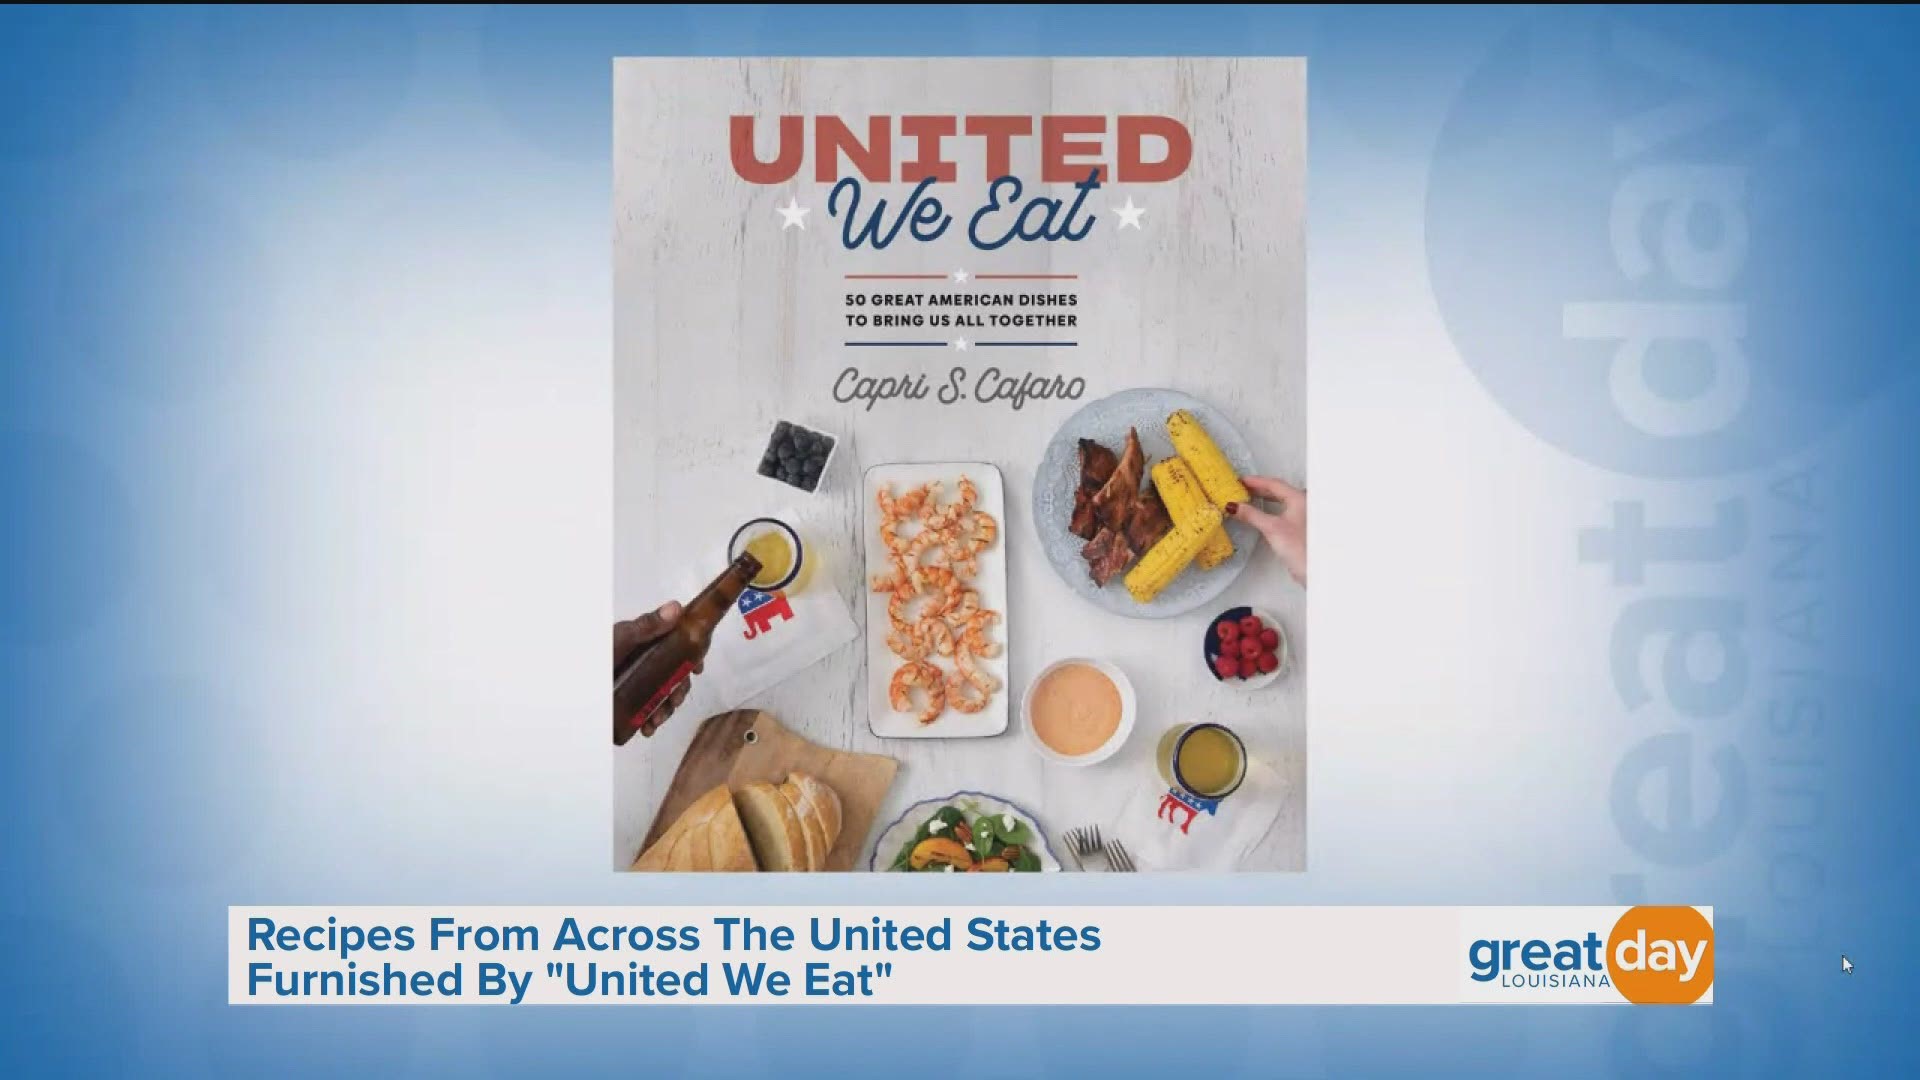 To pick up your copy of "United We Eat," visit UnitedWeEat.com.